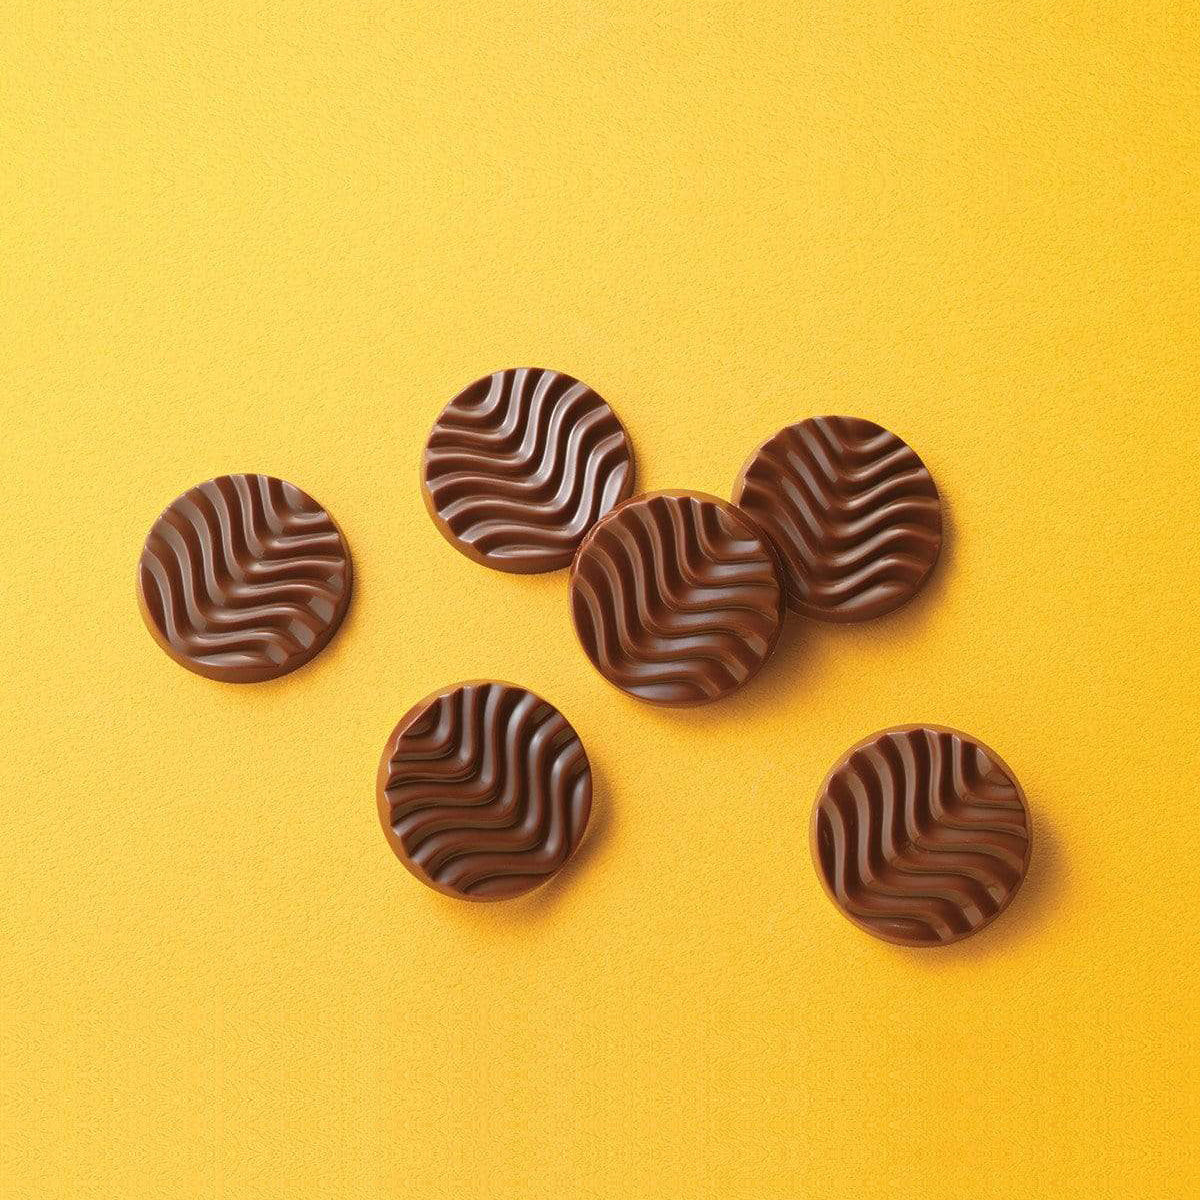 ROYCE' Chocolate - Pure Chocolate "Colombia Milk" - Image shows brown chocolate discs with a waved texture. Background is in color yellow.